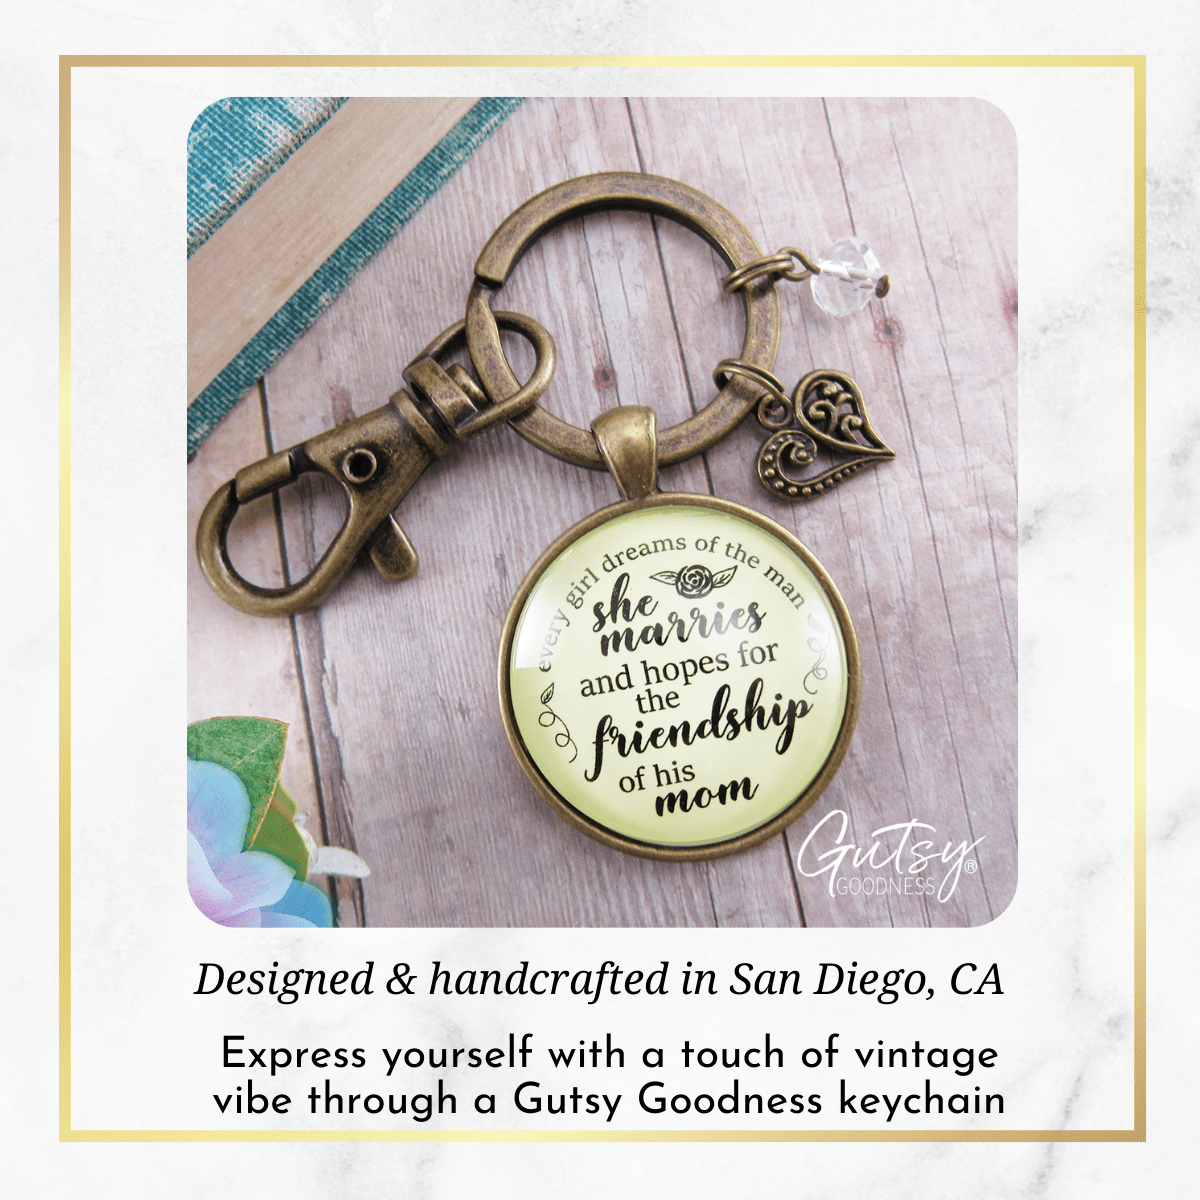 To Her Mother in Law Keychain I Dreamed of Friendship With You Wedding Day Gift Jewelry - Gutsy Goodness Handmade Jewelry;To Her Mother In Law Keychain I Dreamed Of Friendship With You Wedding Day Gift Jewelry - Gutsy Goodness Handmade Jewelry Gifts